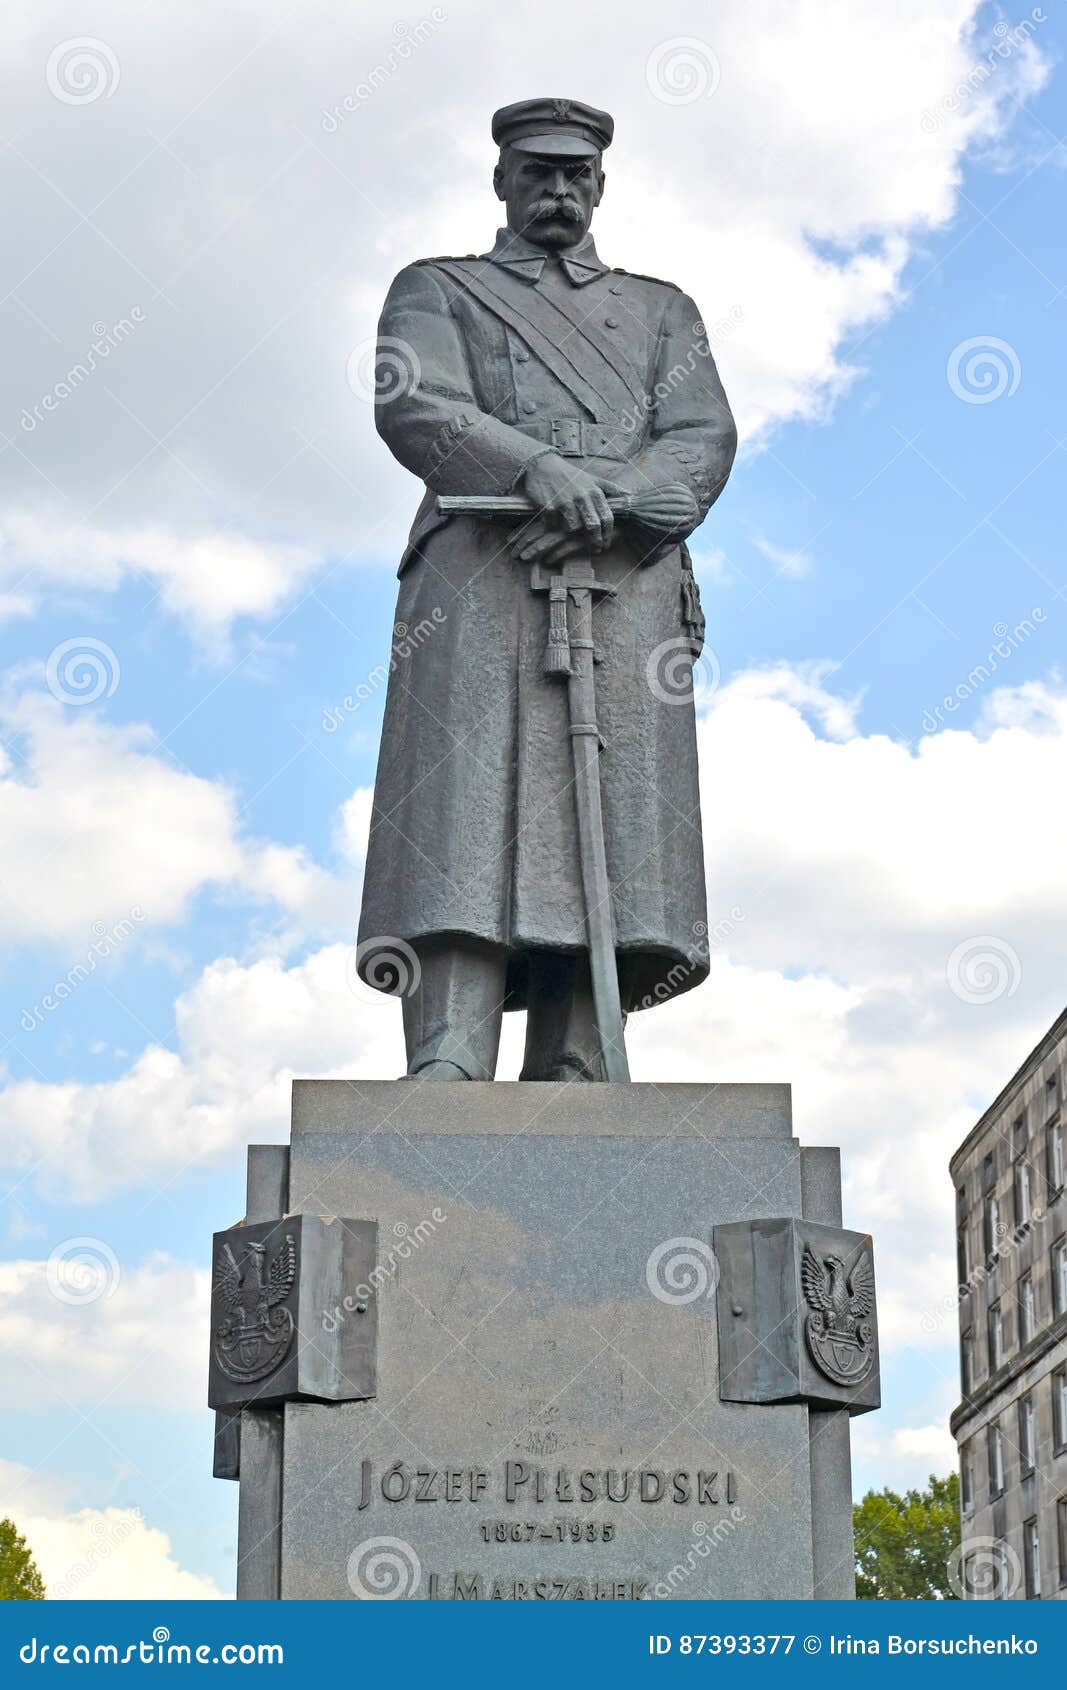 warsaw, poland. a monument to the marshal jozef pilsudsky against the background of the skyn